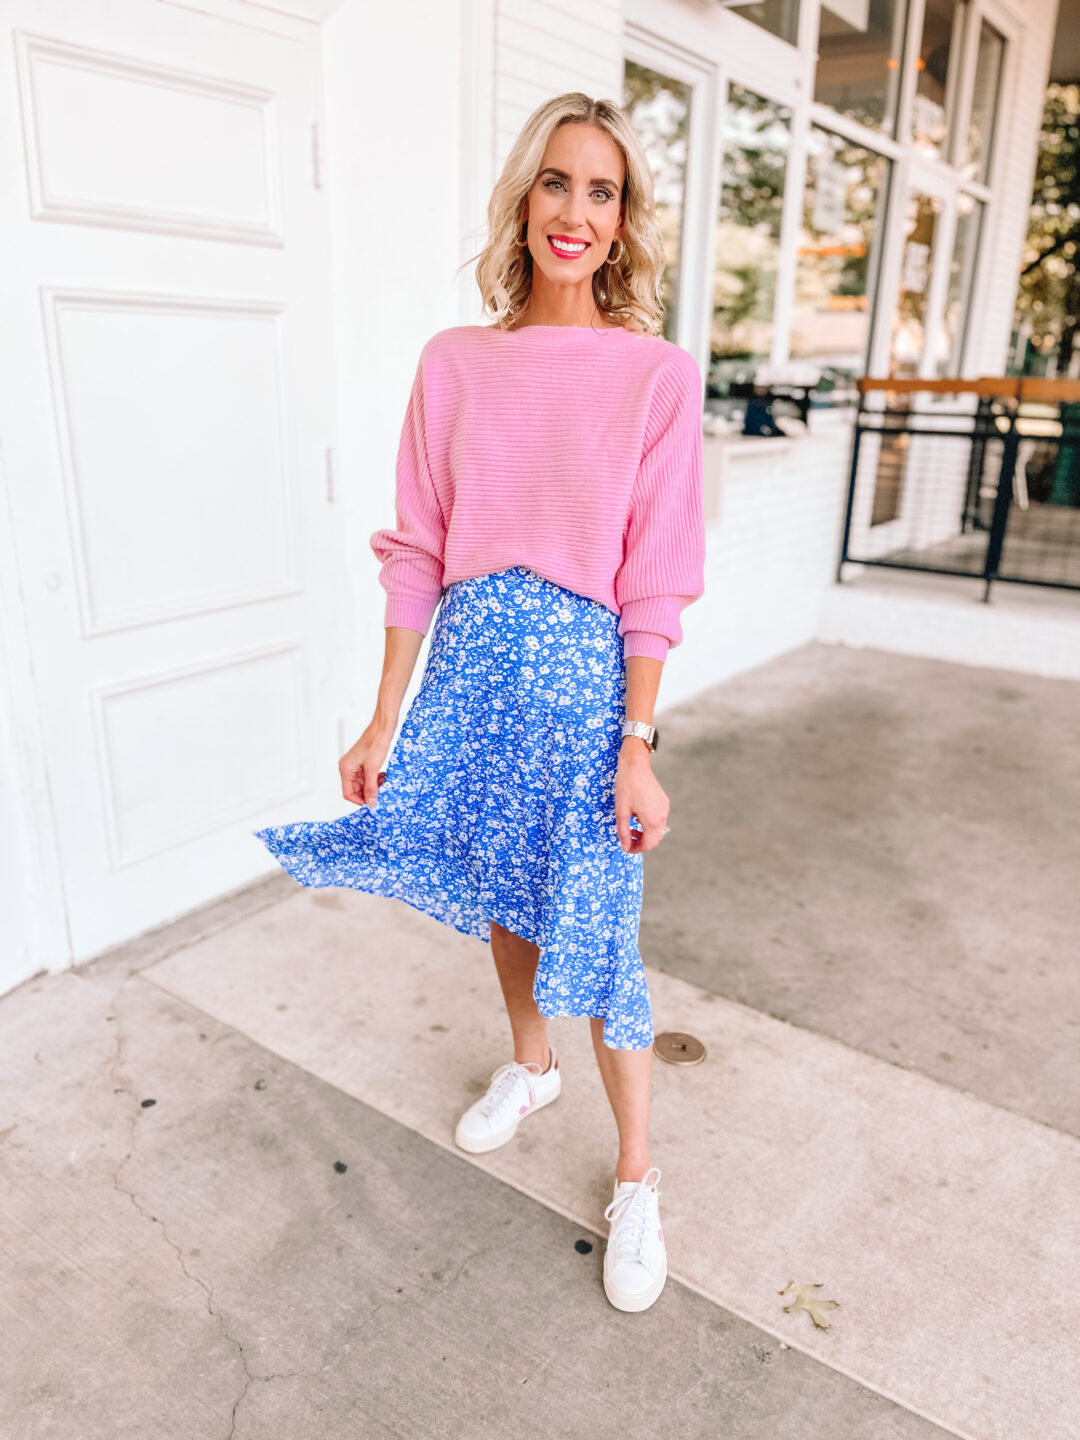 Chunky Knits  Floral Skirts  bows  sequins